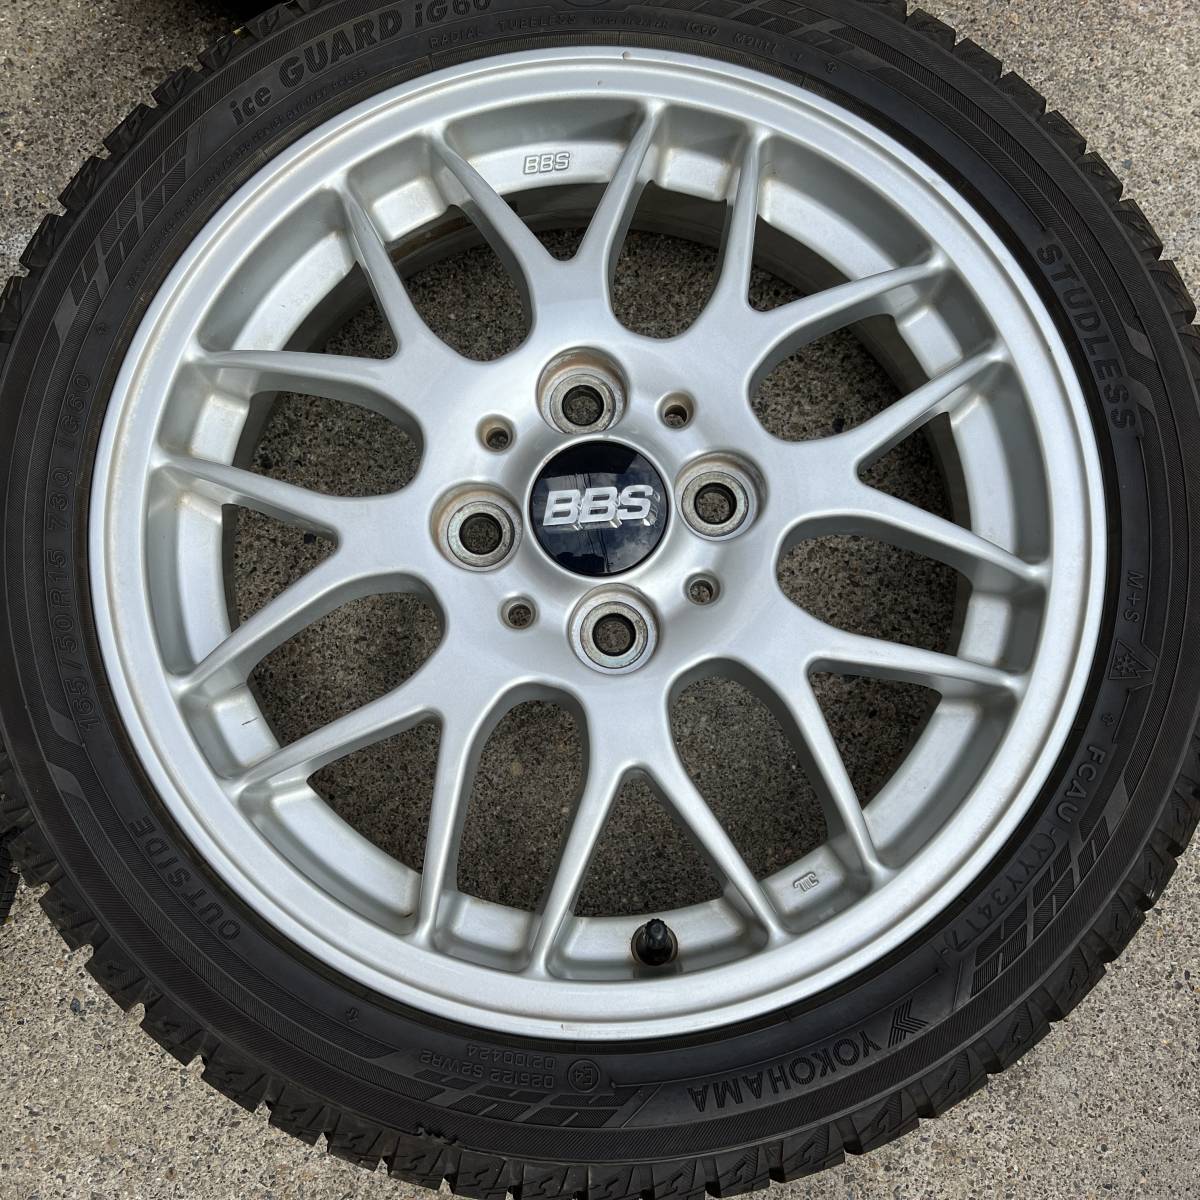 [ postage Honshu 5000 jpy ]L880 Copen original BBS RX280 4.5Jx15 PCD100 +45 17 year ice GUARD iG60 165/50R15 Ultimate edition (TI)